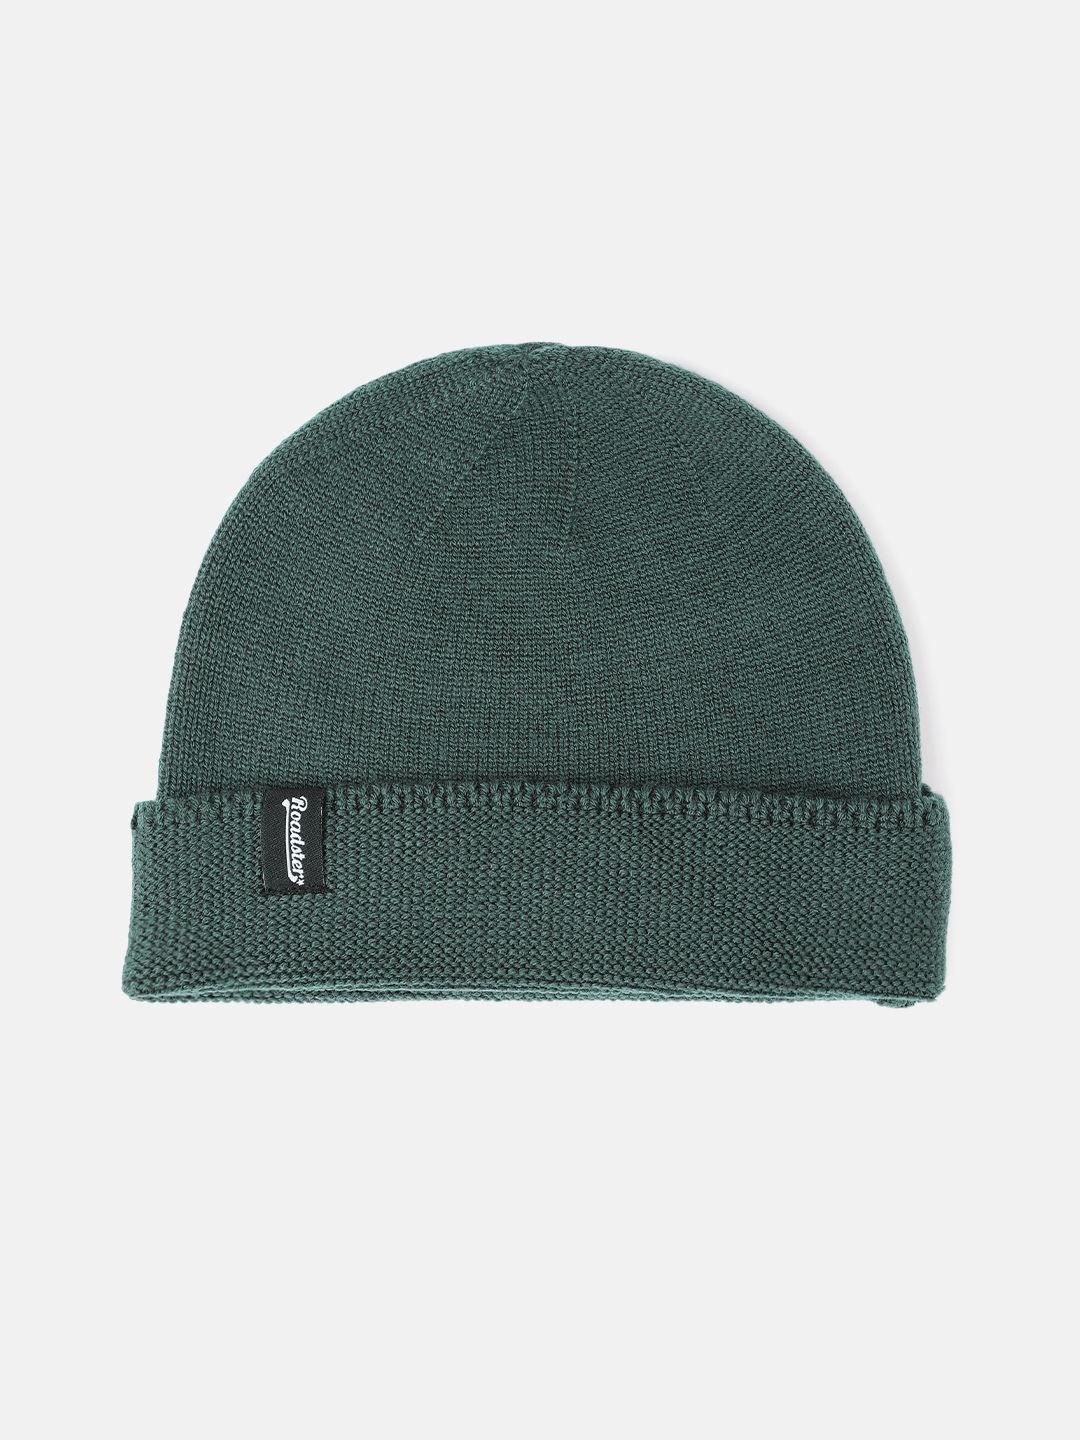 the roadster lifestyle co unisex olive green solid beanie